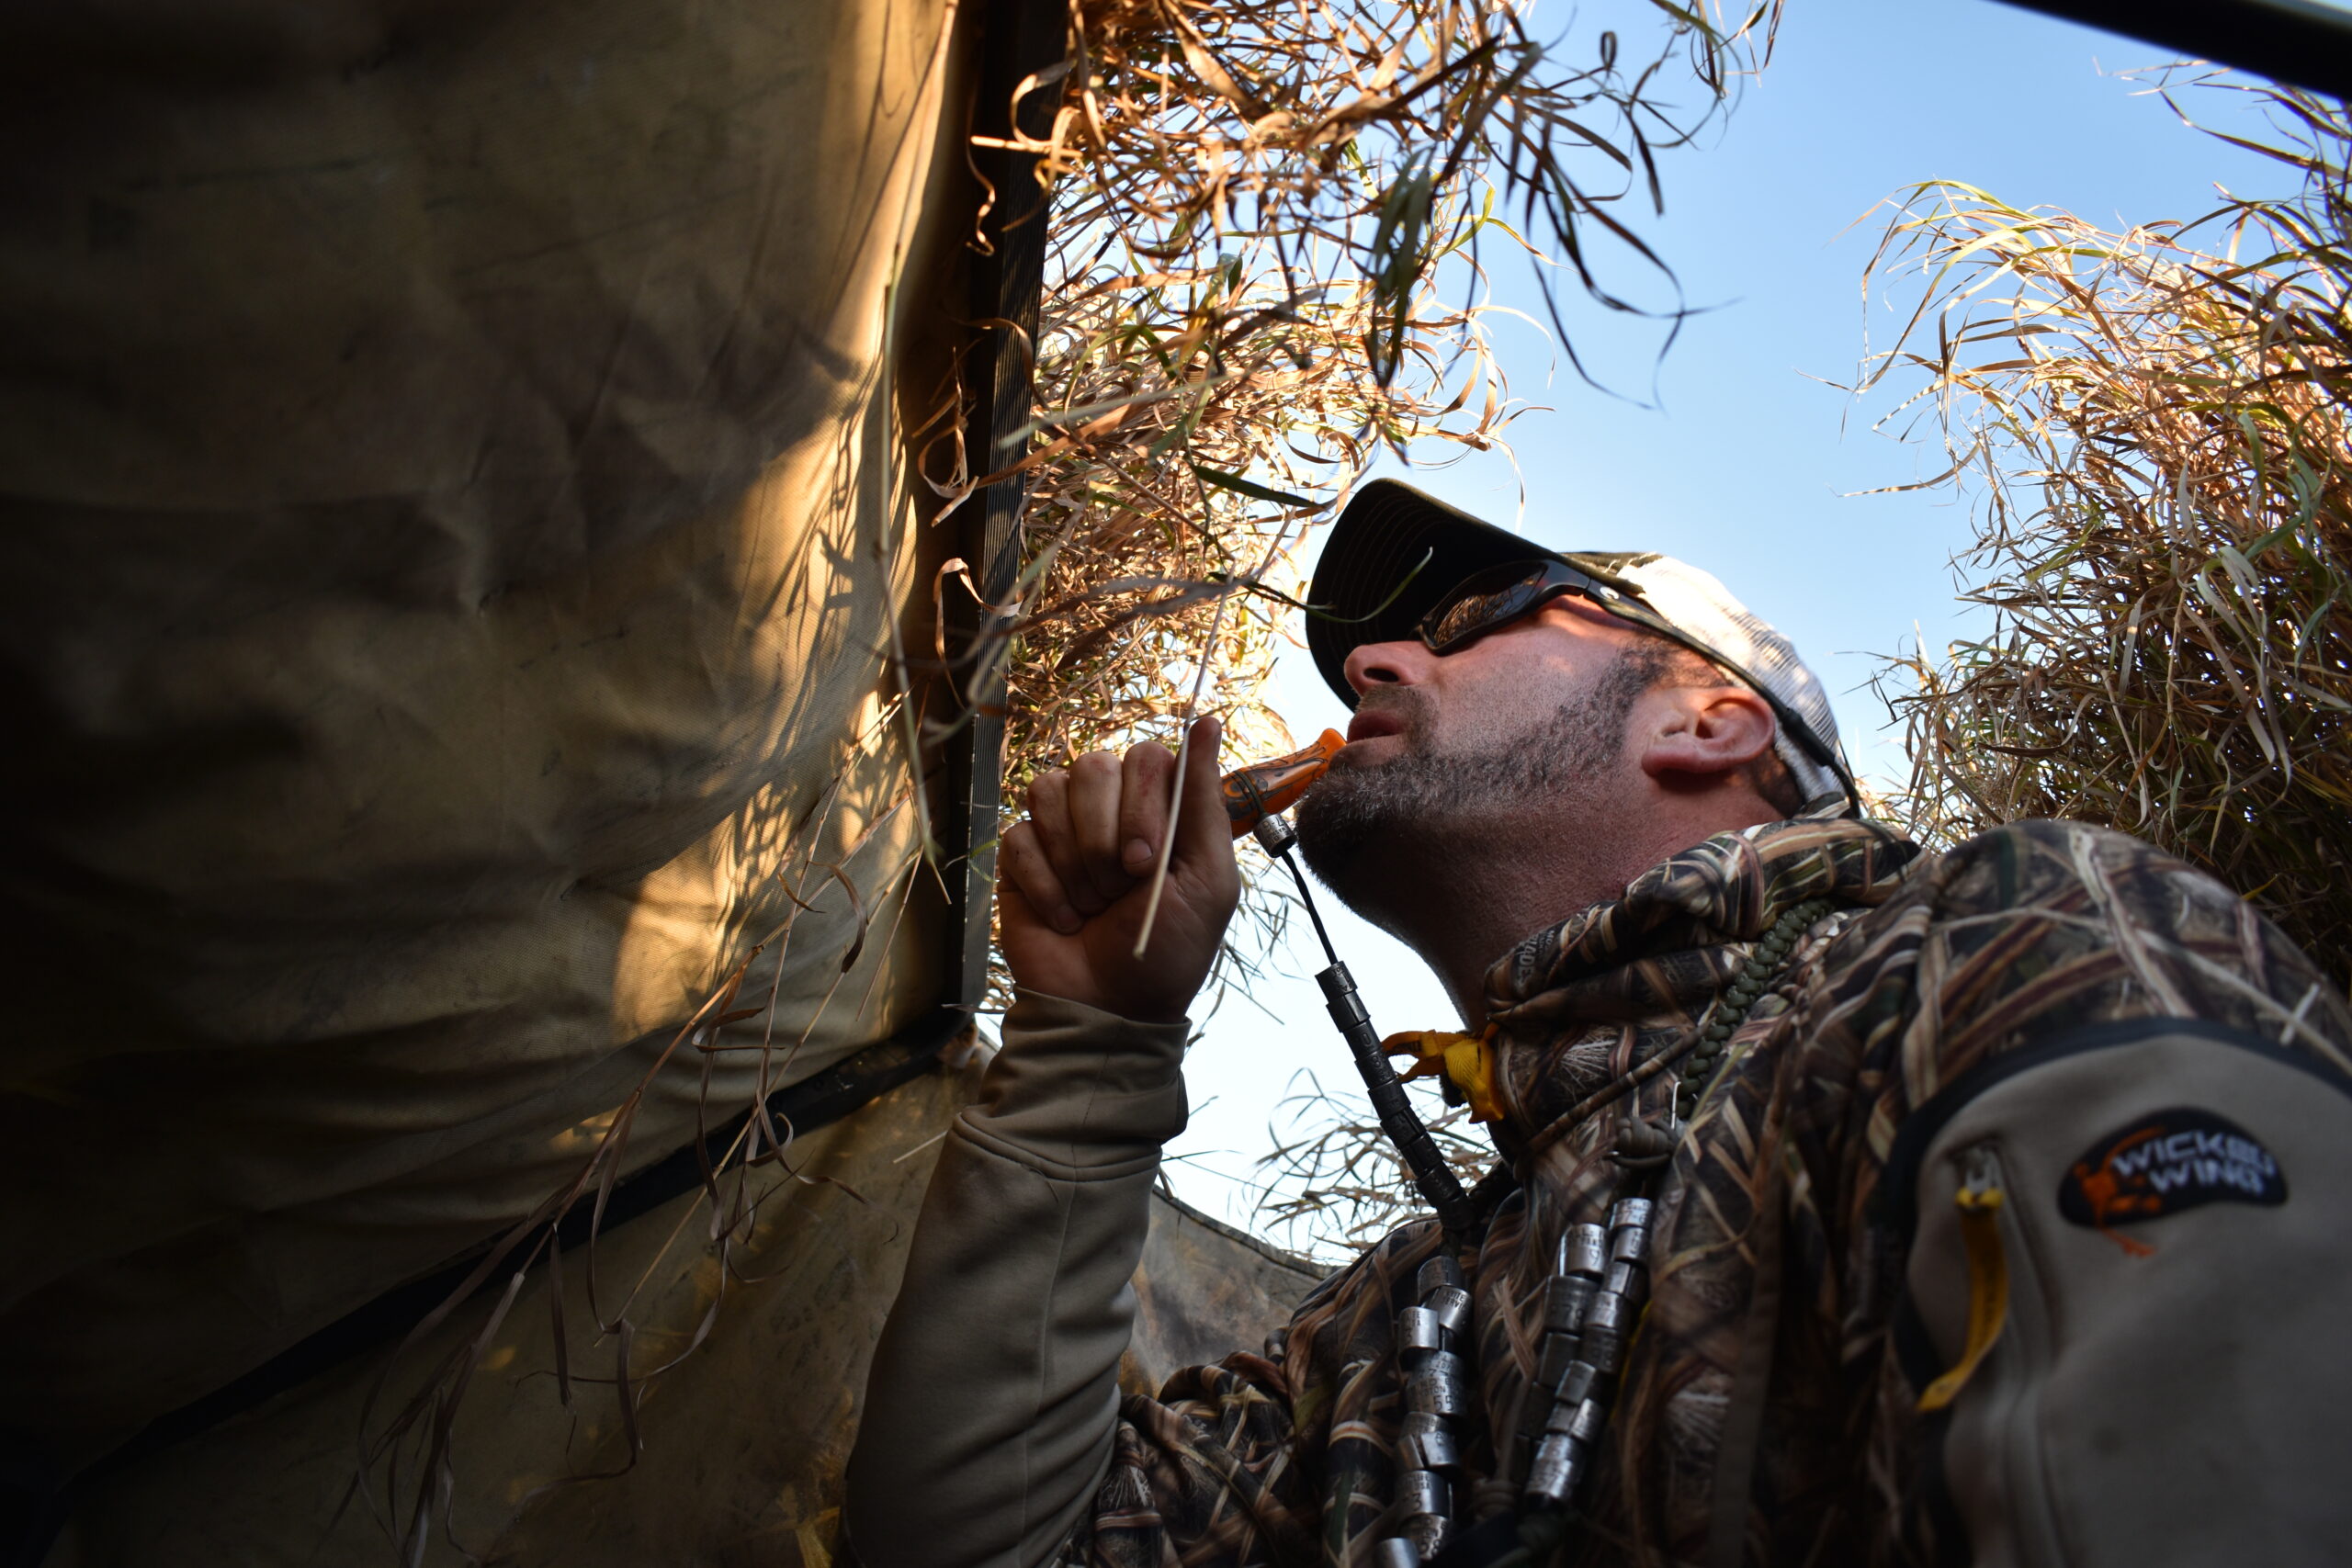 Fred Zink on the duck call.